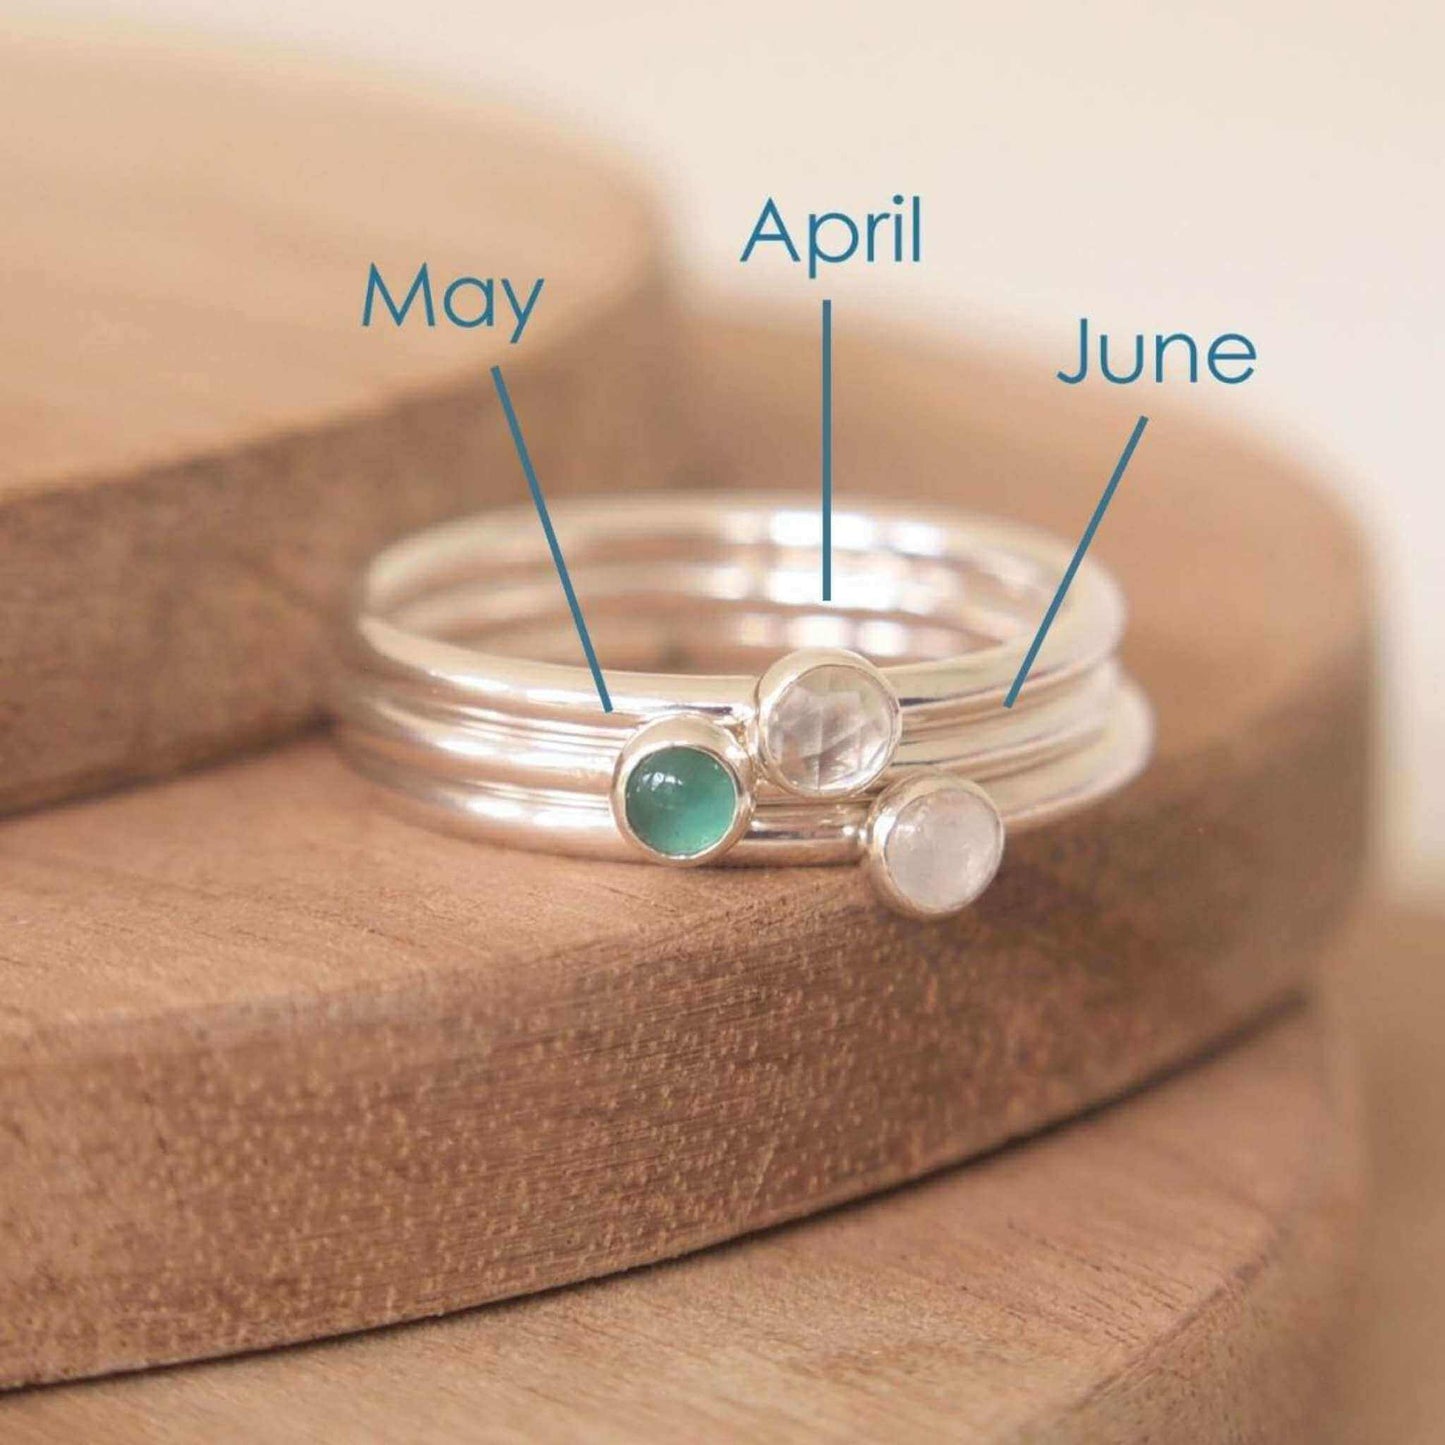 Three Silver rings, each set simply with a single gemstone in Green Agate, White Topaz and Moonstone in a round 3mm size. Birthstones for April, May and June. Handmade in Scotland by Maram Jewellery